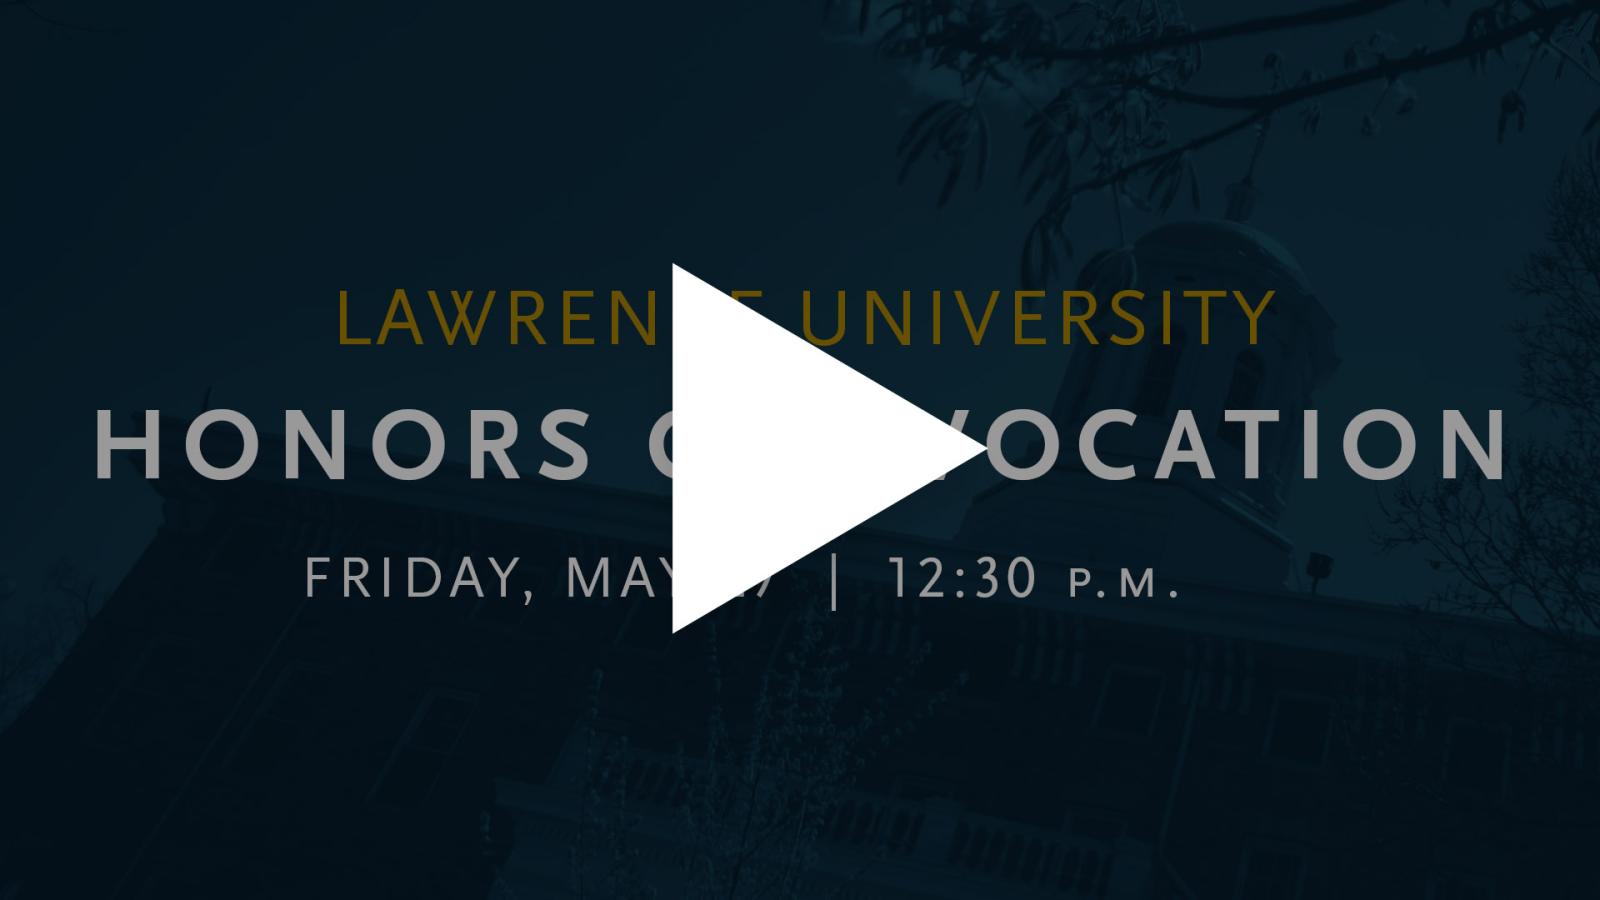 Lawrence University Honors Convocation, Friday May 27, 12:30 P.M.